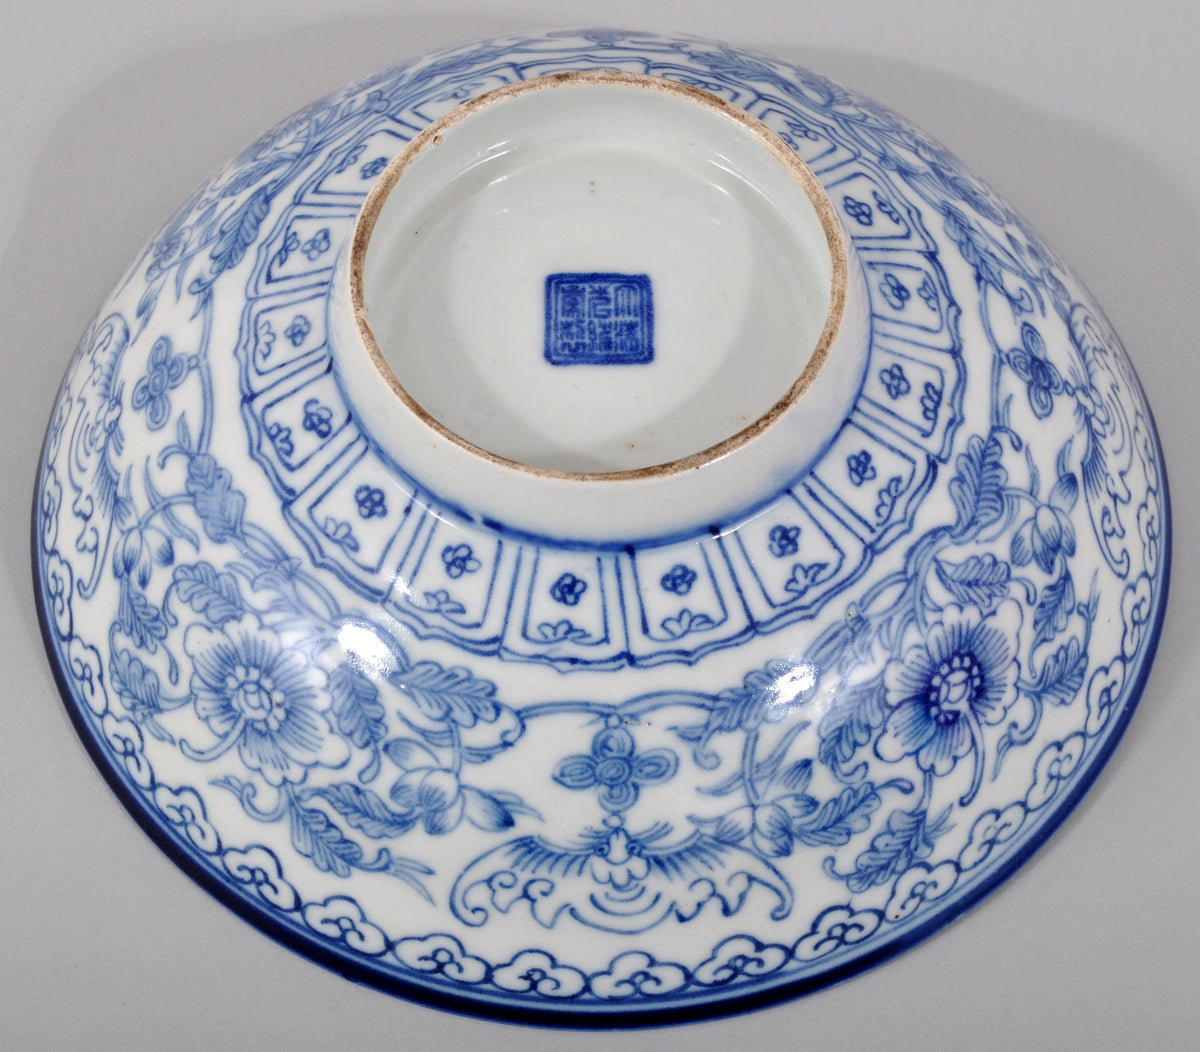 Antique Chinese Qing Dynasty Blue and White Porcelain Bowl Bearing Qianlong Marks, Circa 1850